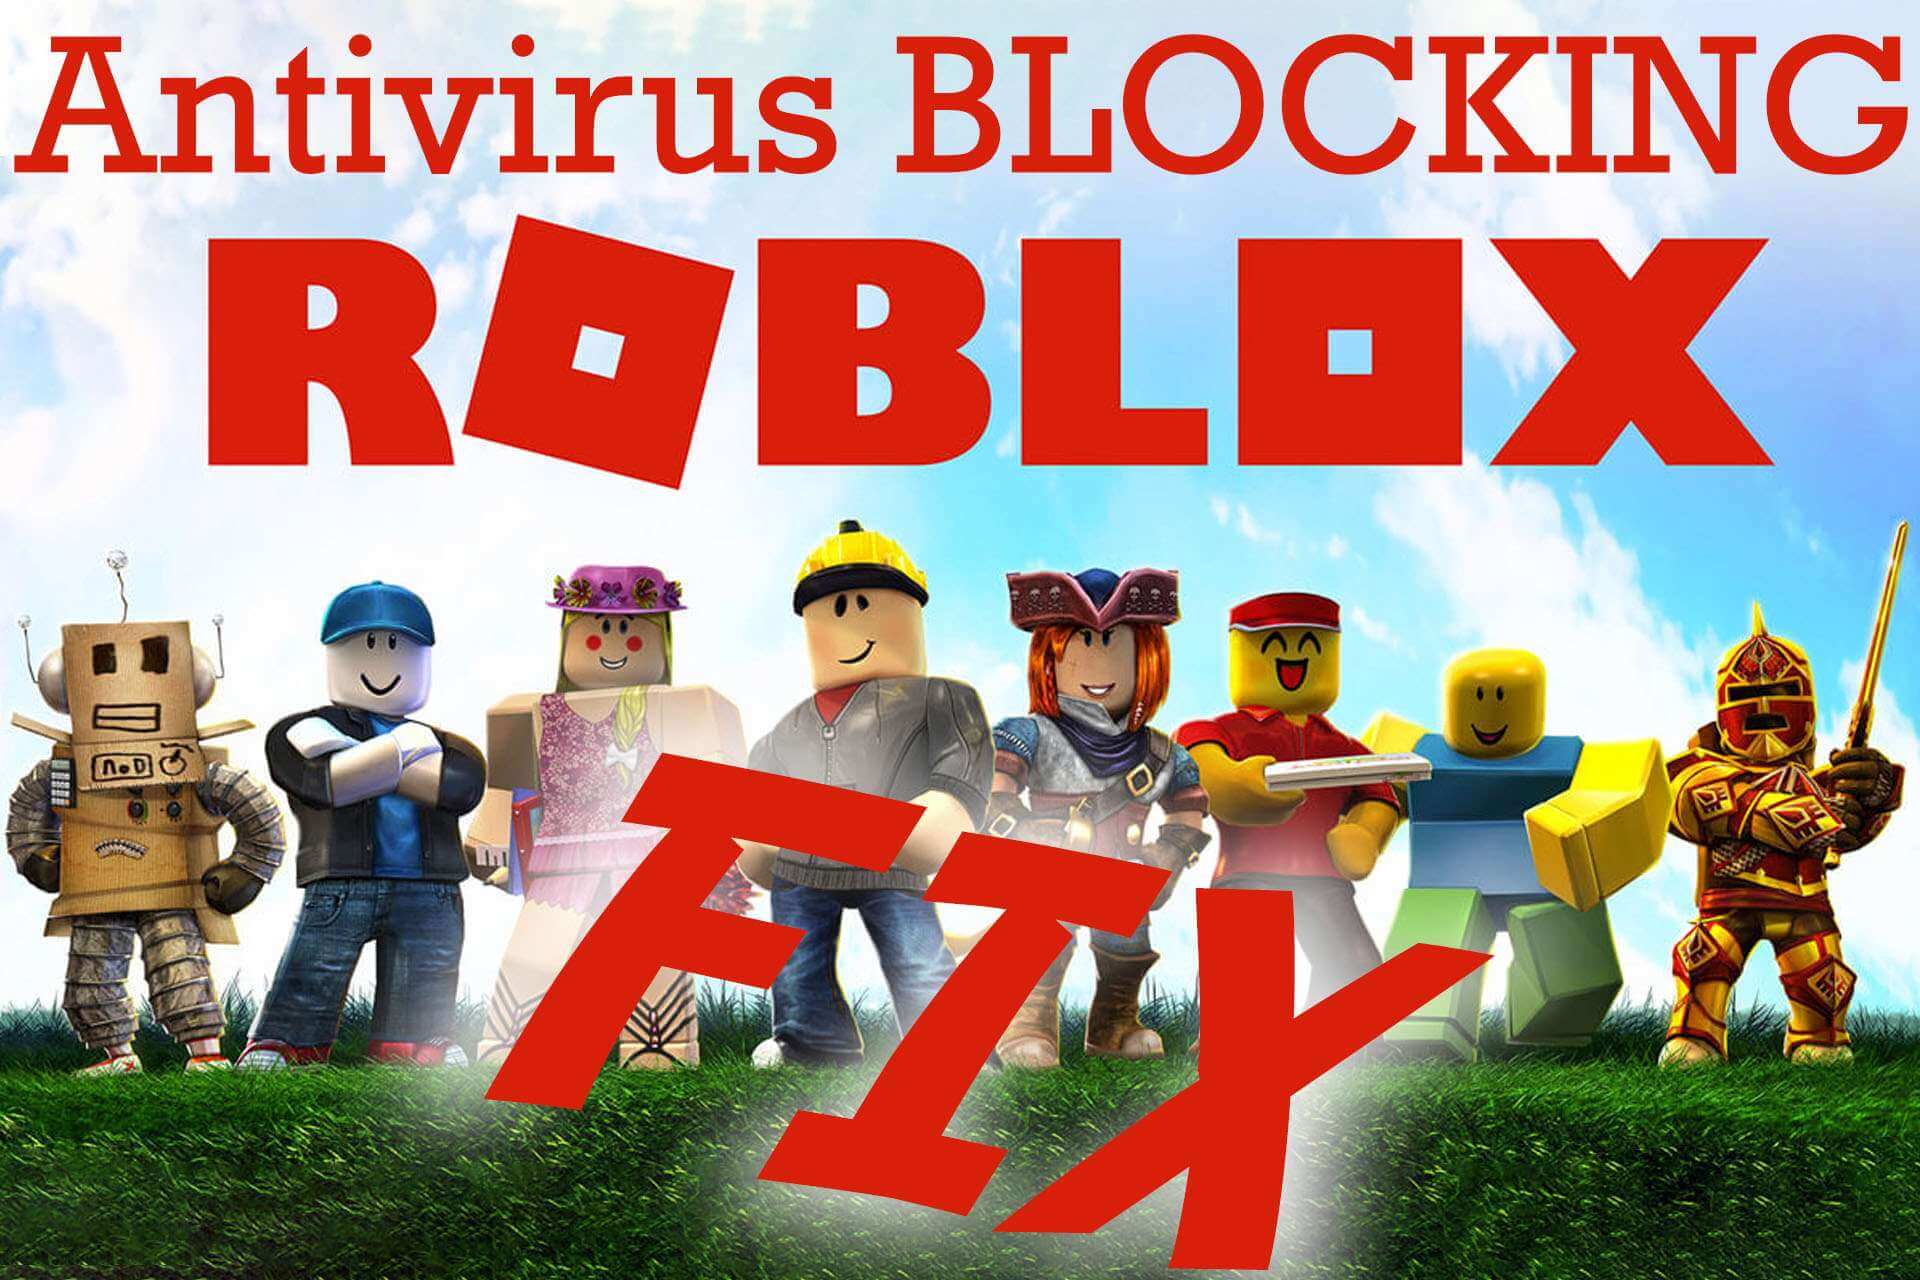 Best Fixes for Roblox Lagging in Windows 10/11